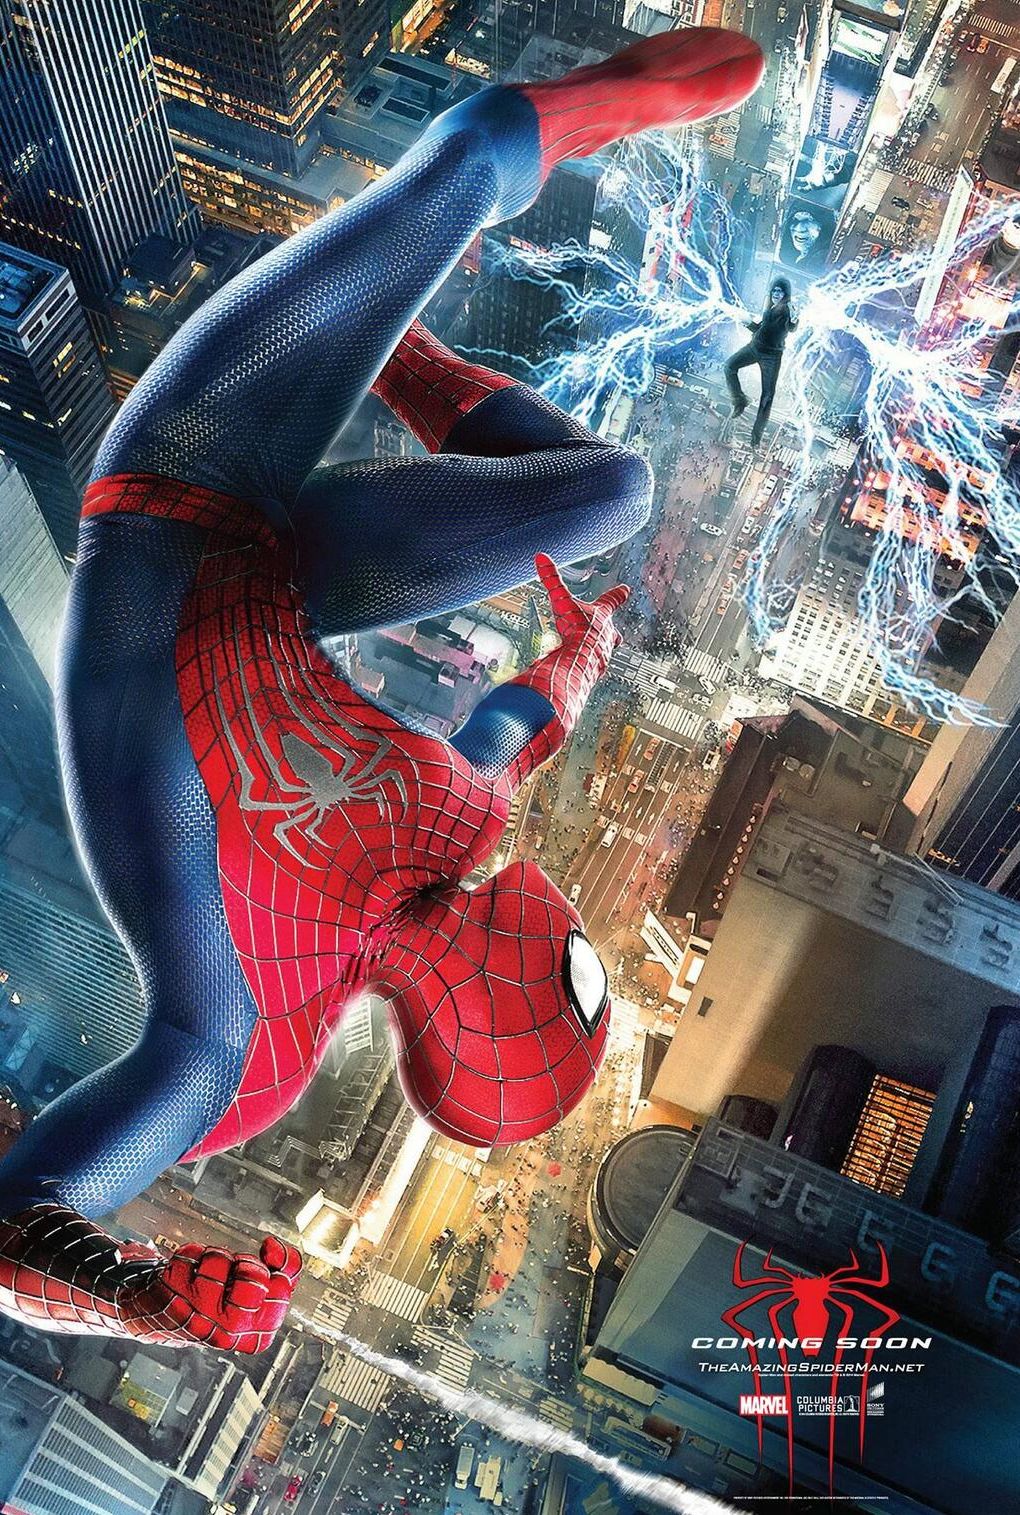 Second New Poster for The Amazing Spider-Man 2